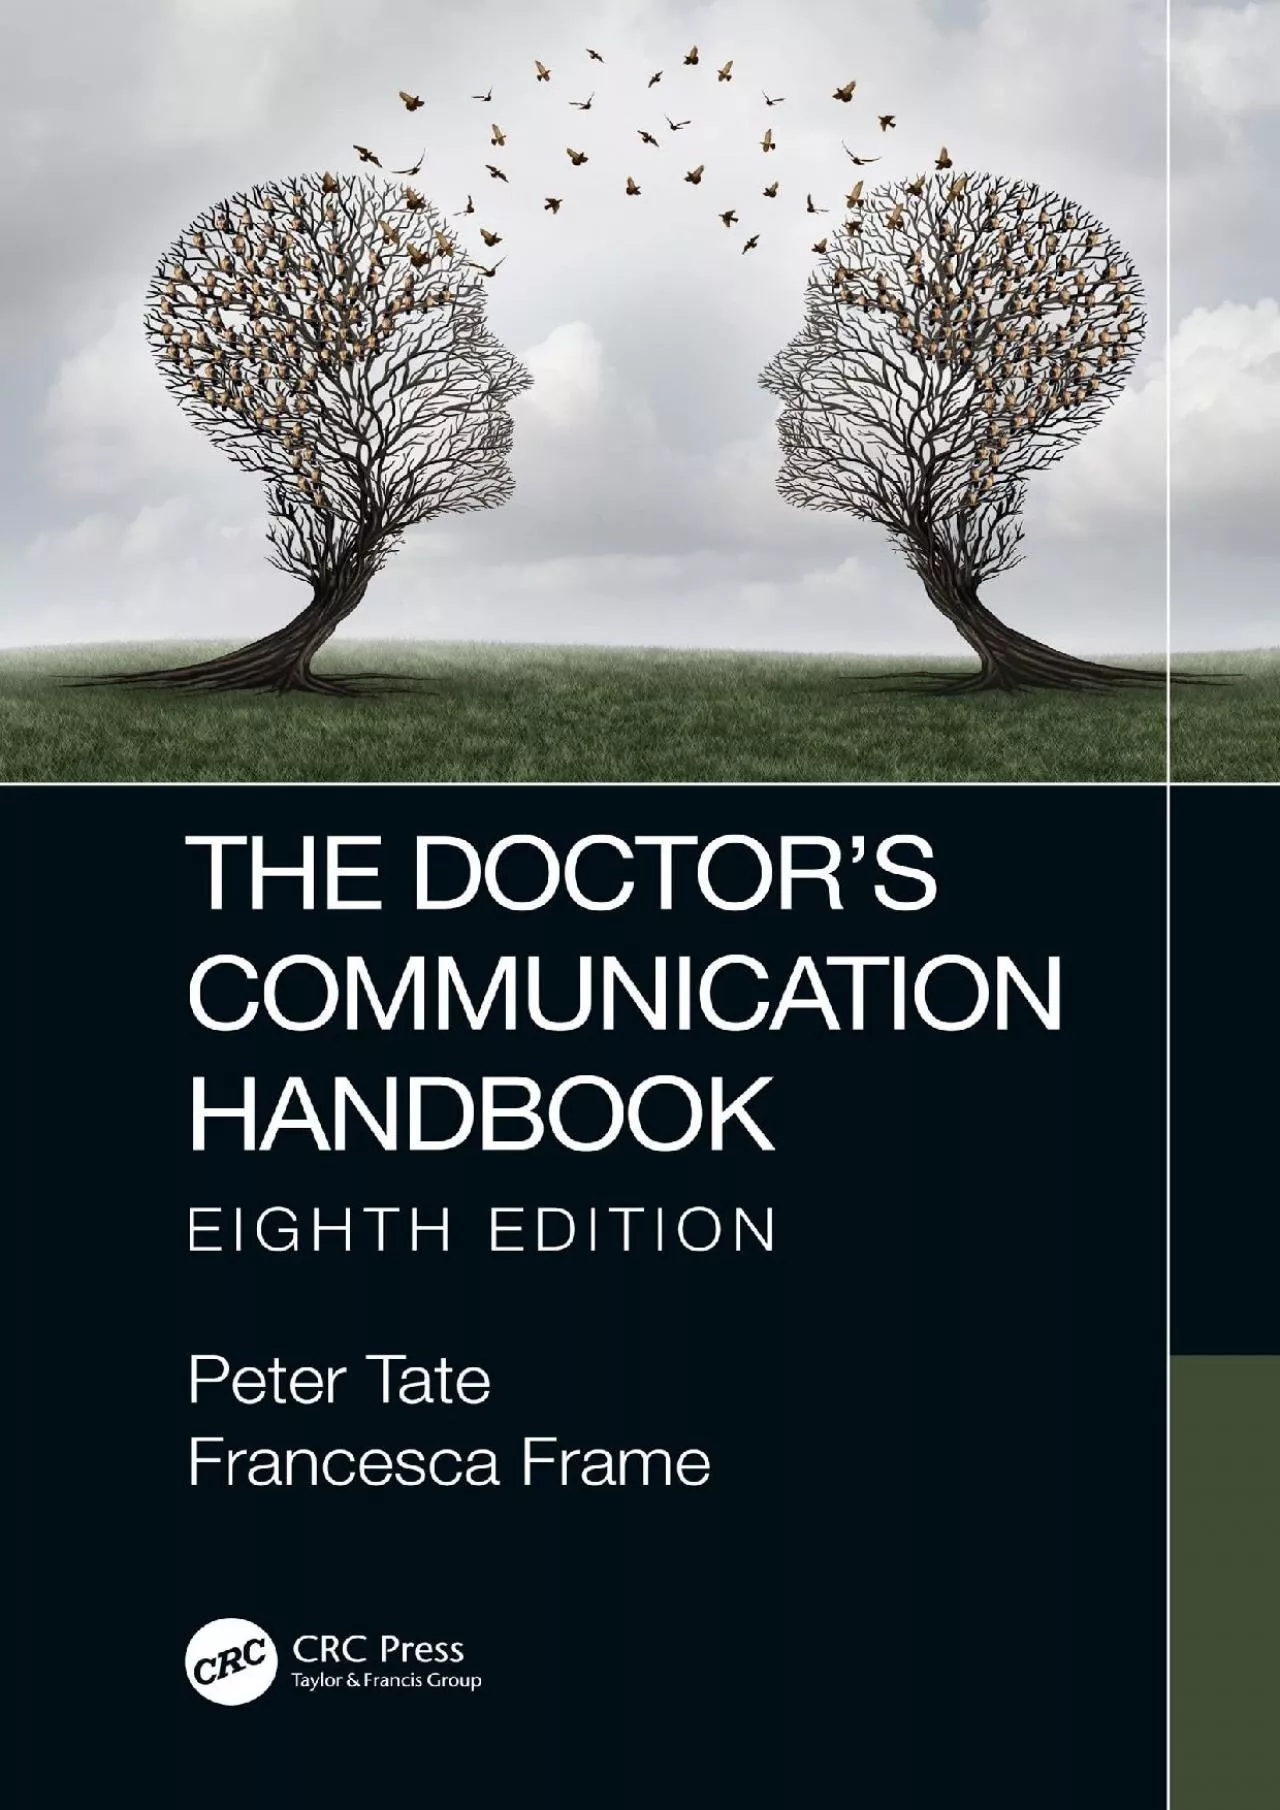 (BOOK)-The Doctor\'s Communication Handbook, 8th Edition